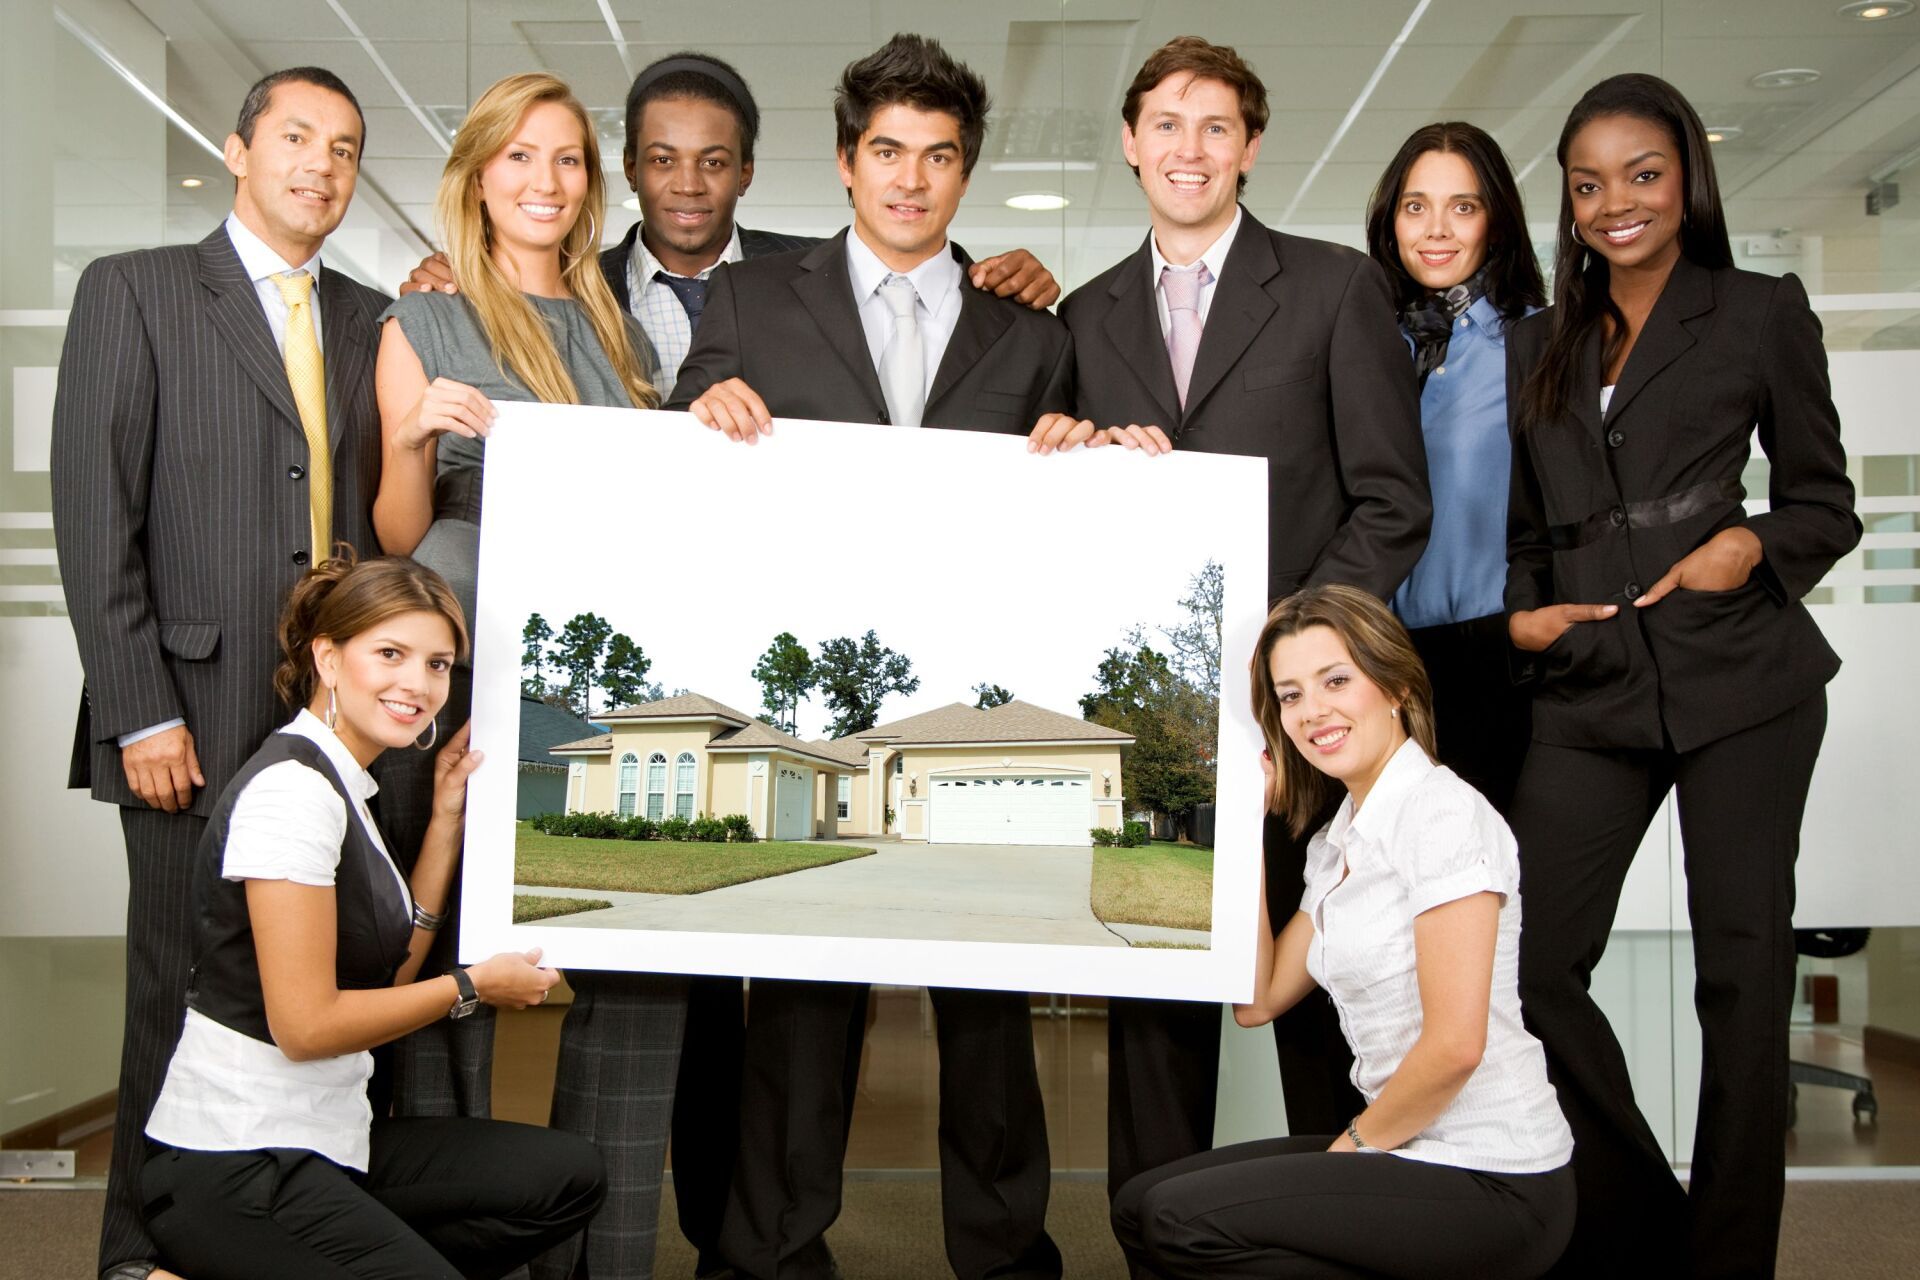 Team of investors holding up a picture of a Florida home.